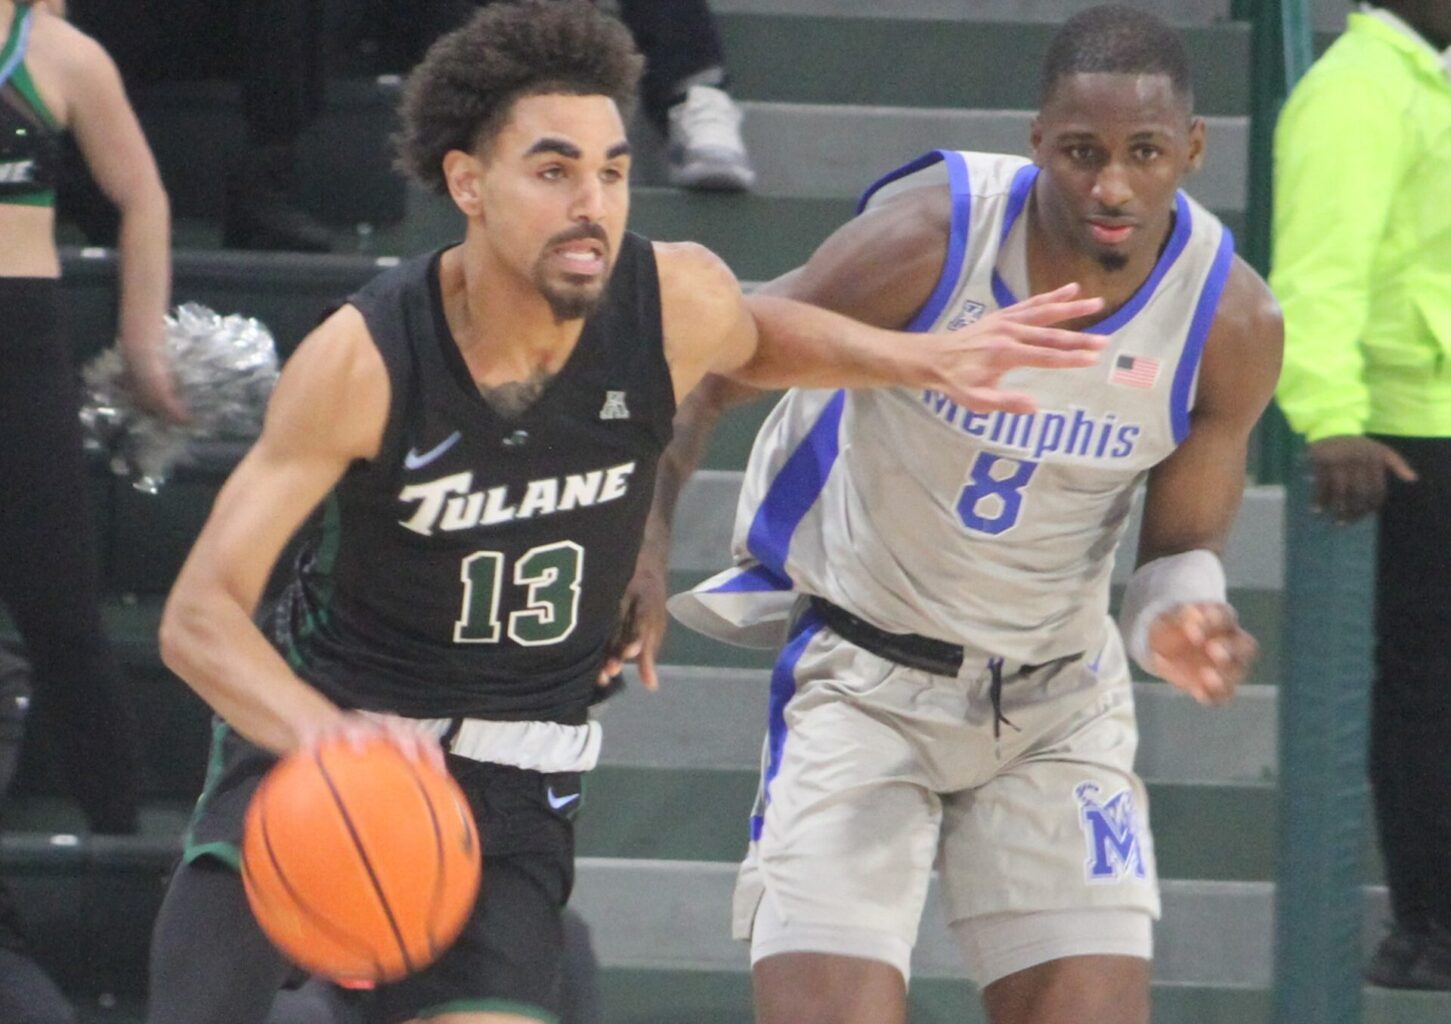 Memphis Tigers drop second straight as Tulane wins, 81-79